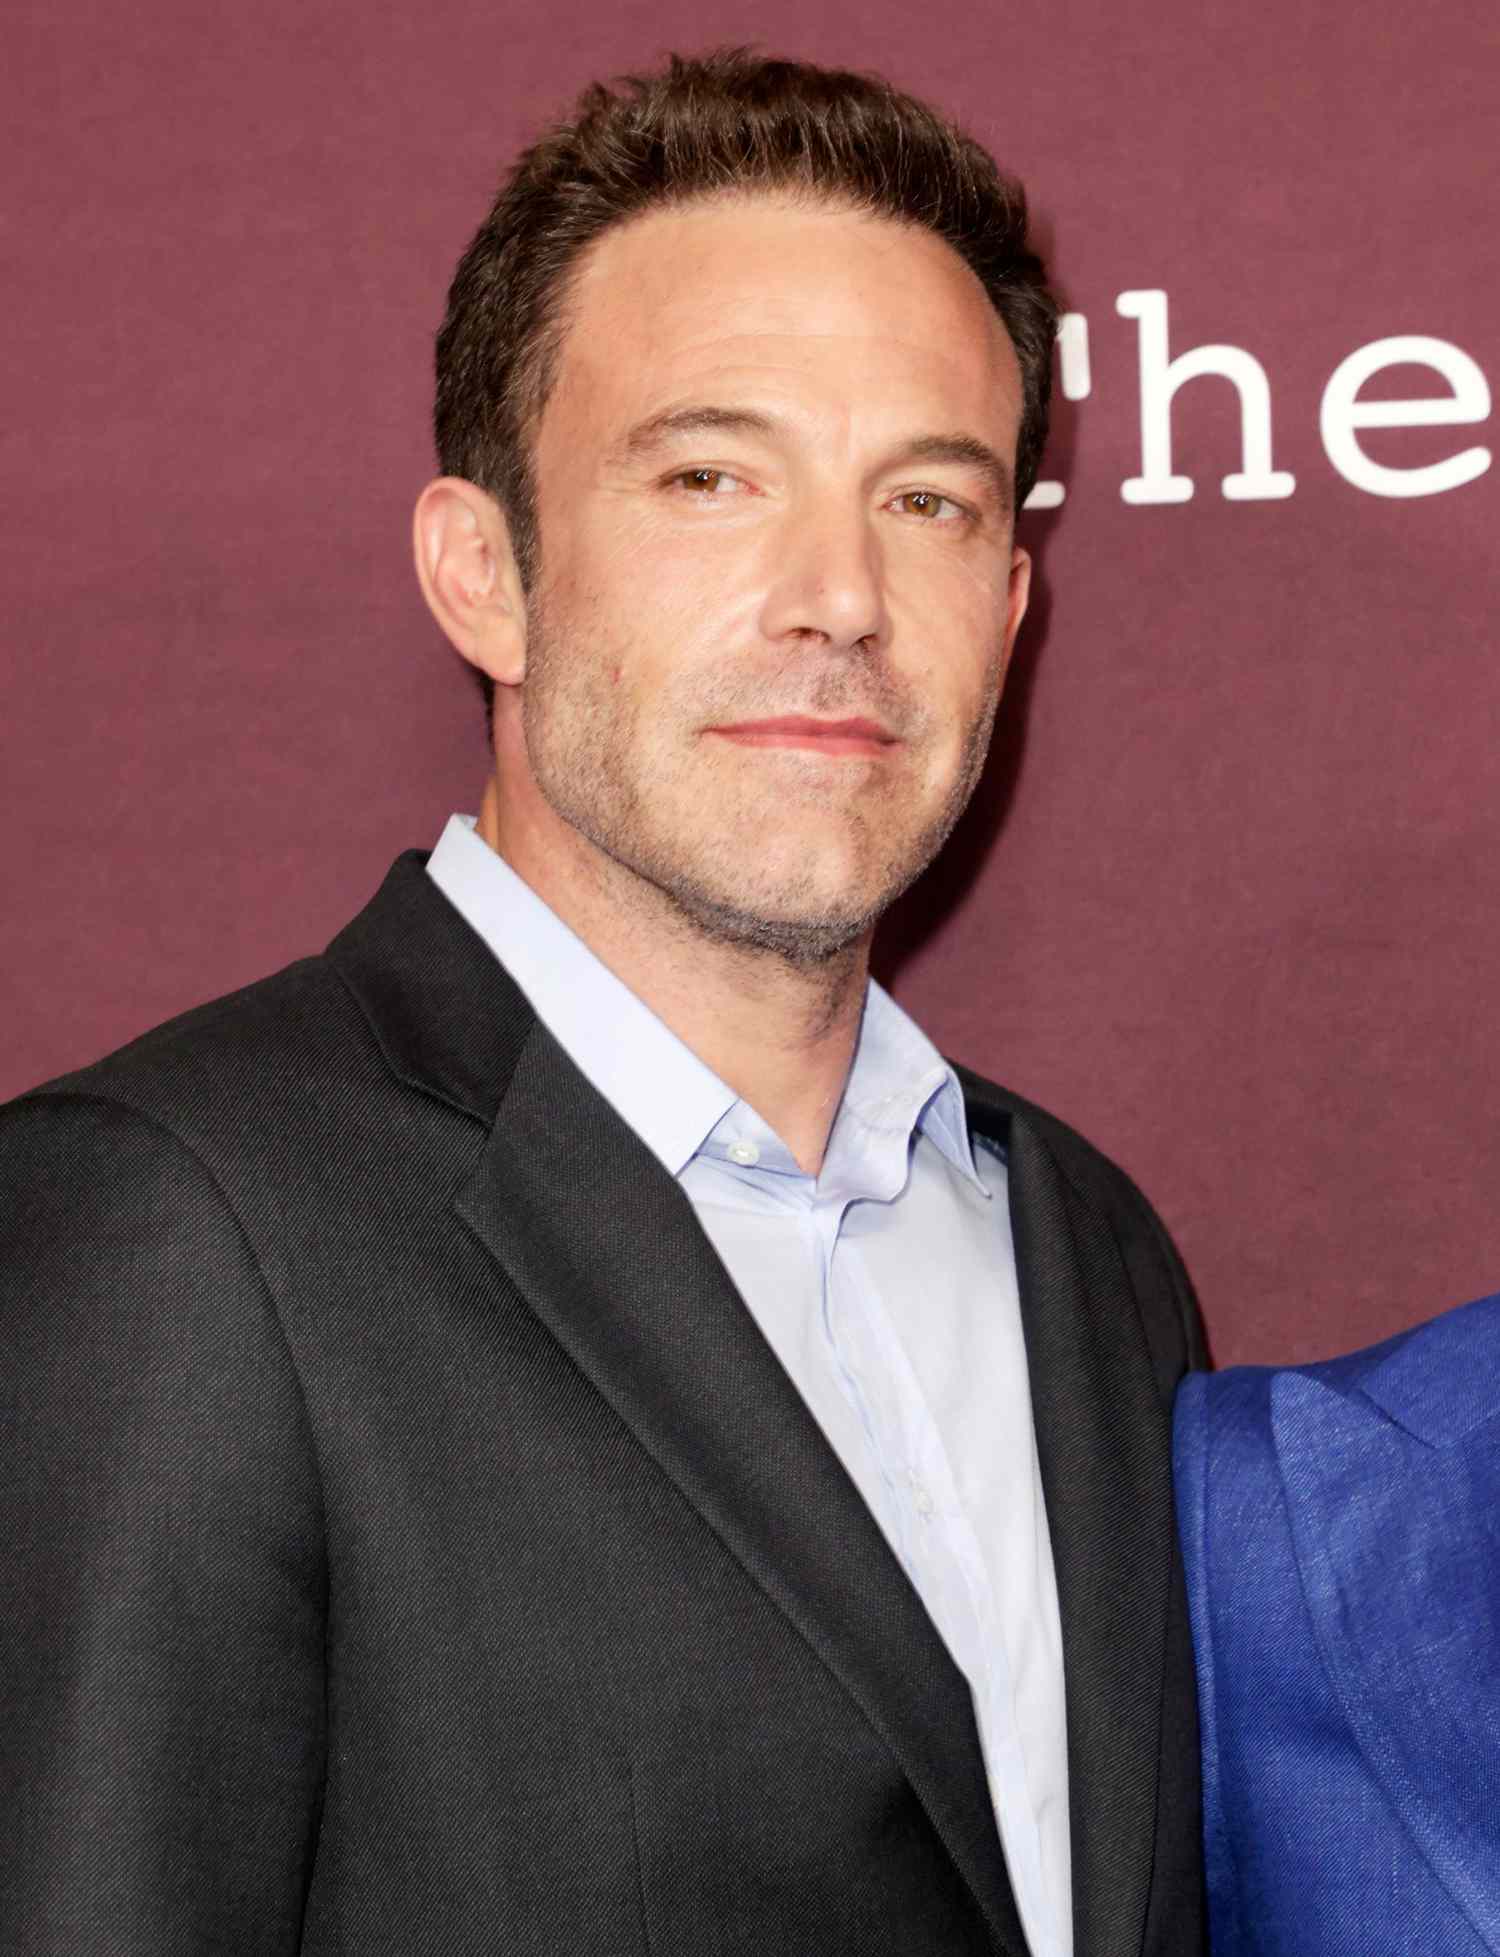 Ben Affleck attends the Los Angeles Premiere of "招标酒吧" presented by Amazon Studios at DGA Theater Complex on October 03, 2021 在洛杉矶